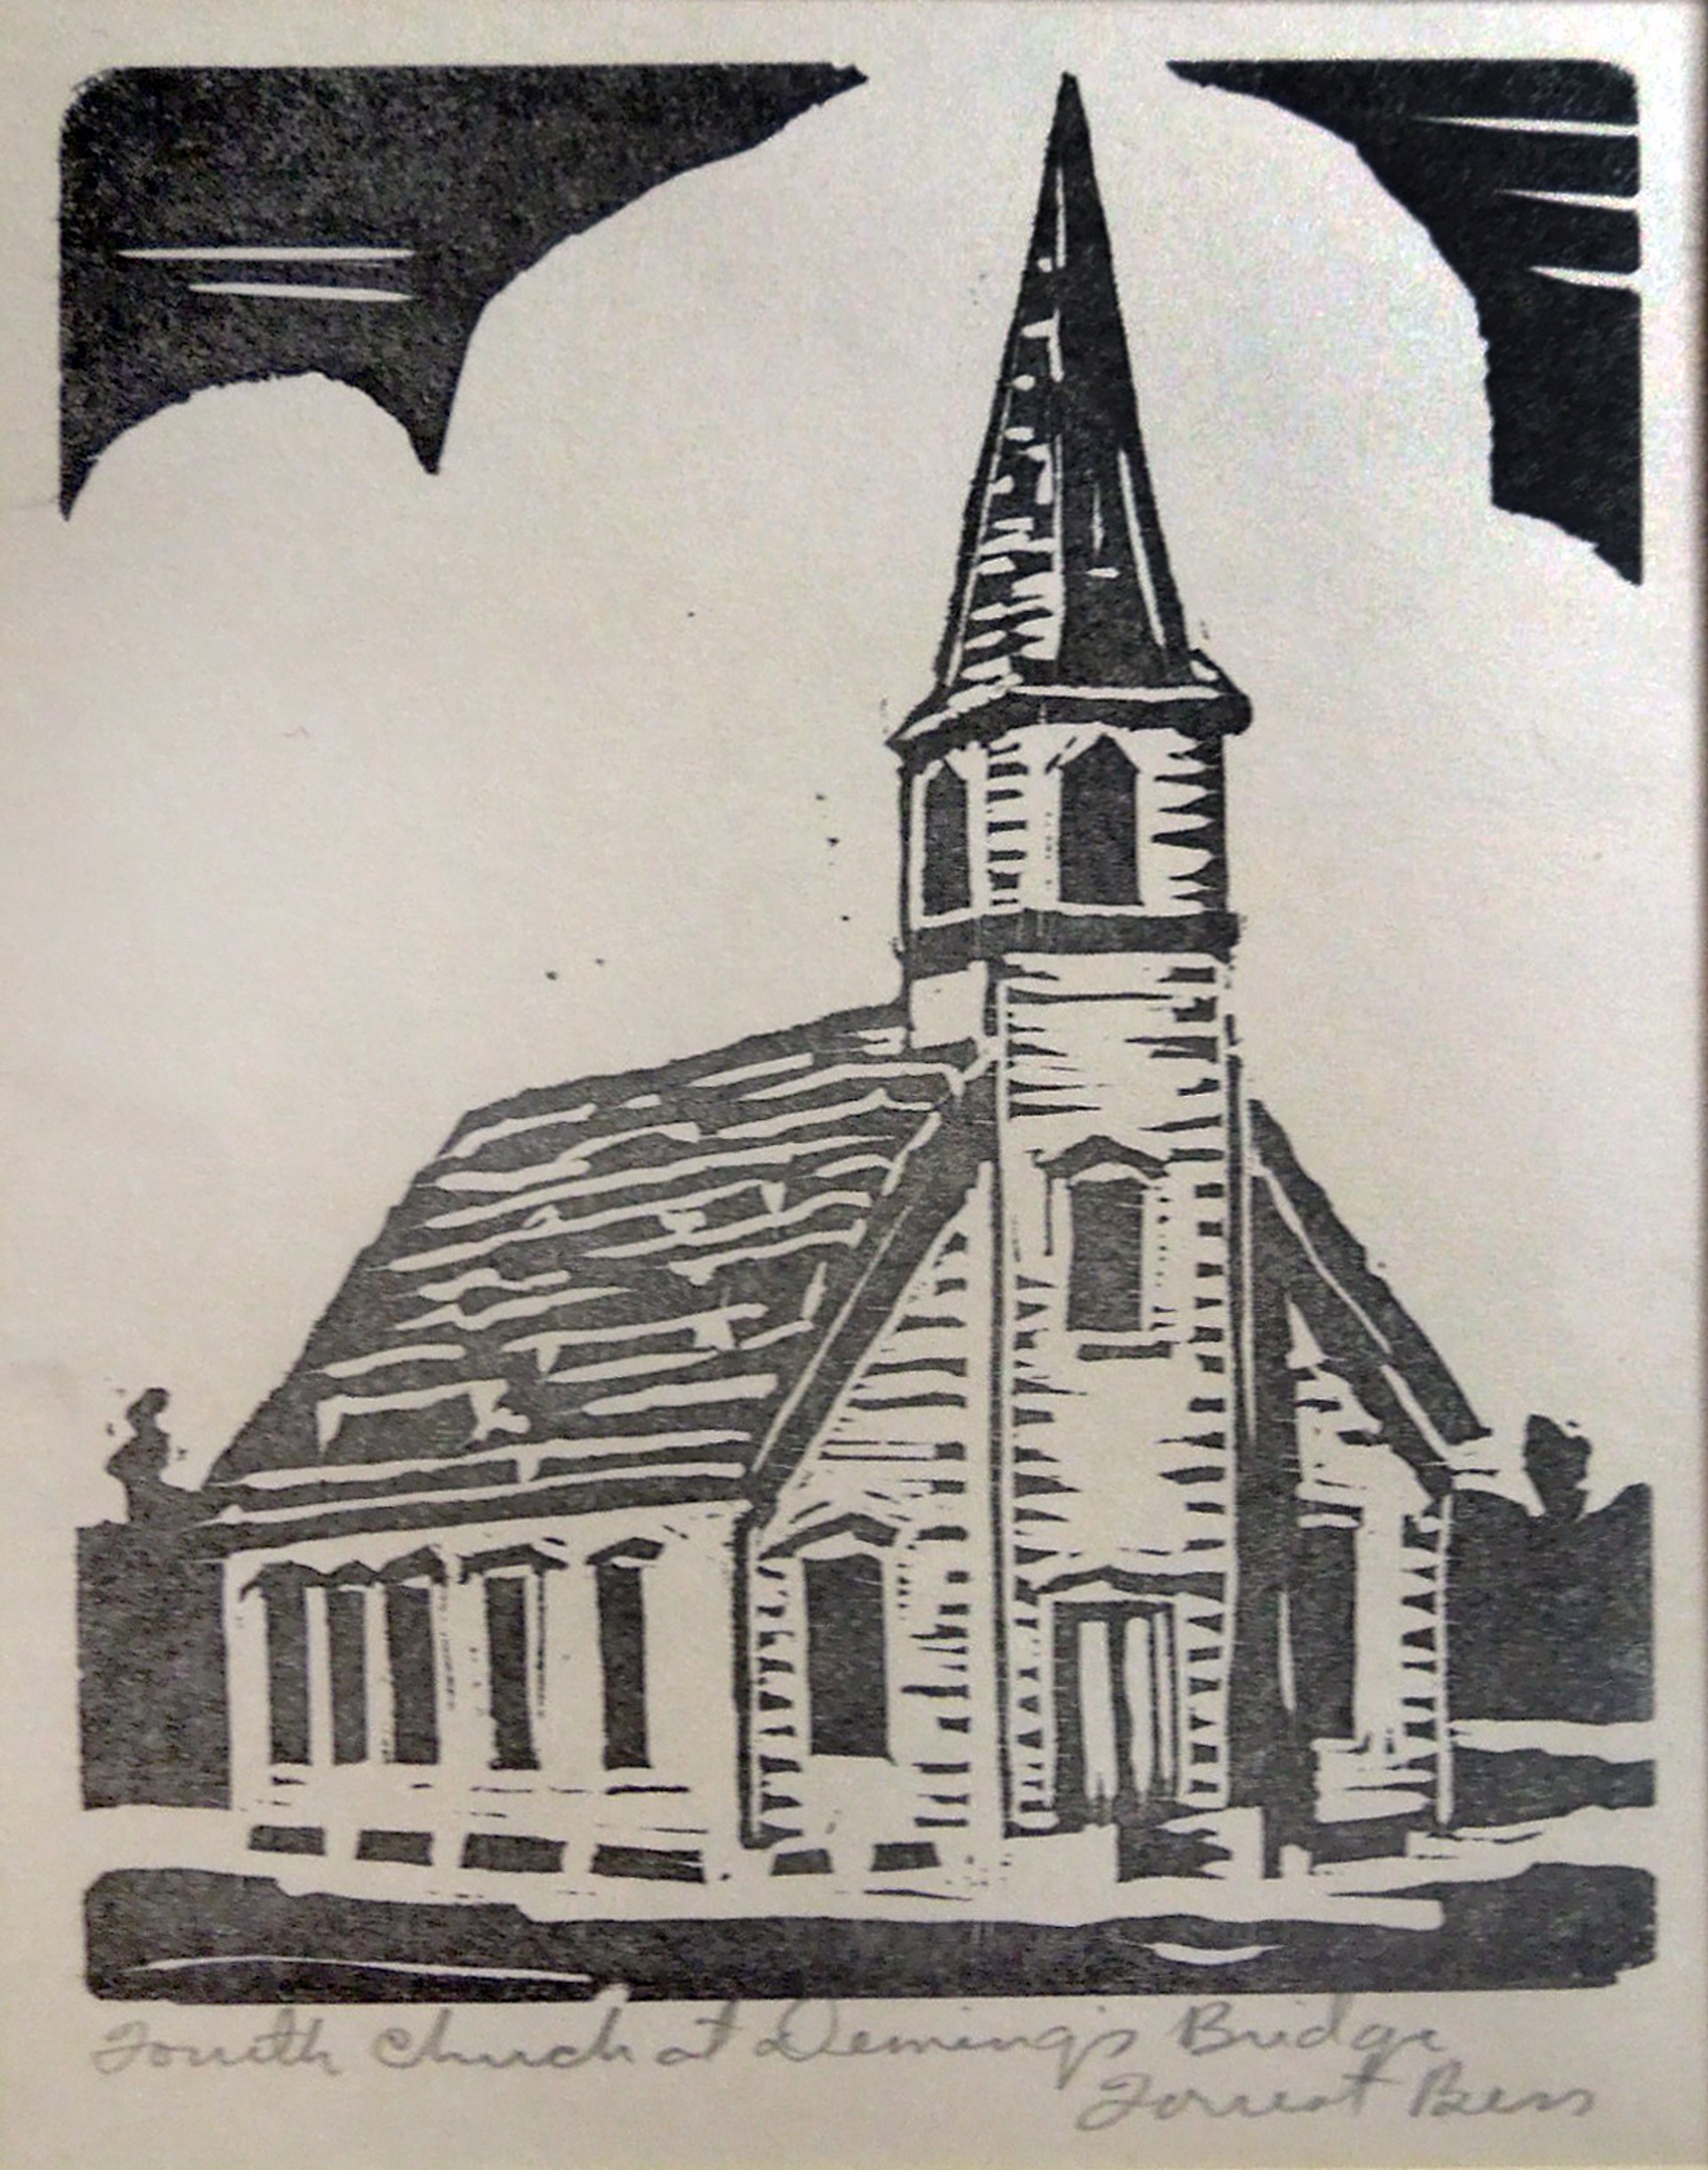 Fourth Church at Deming's Bridge, Ed. 200 by Forrest Bess